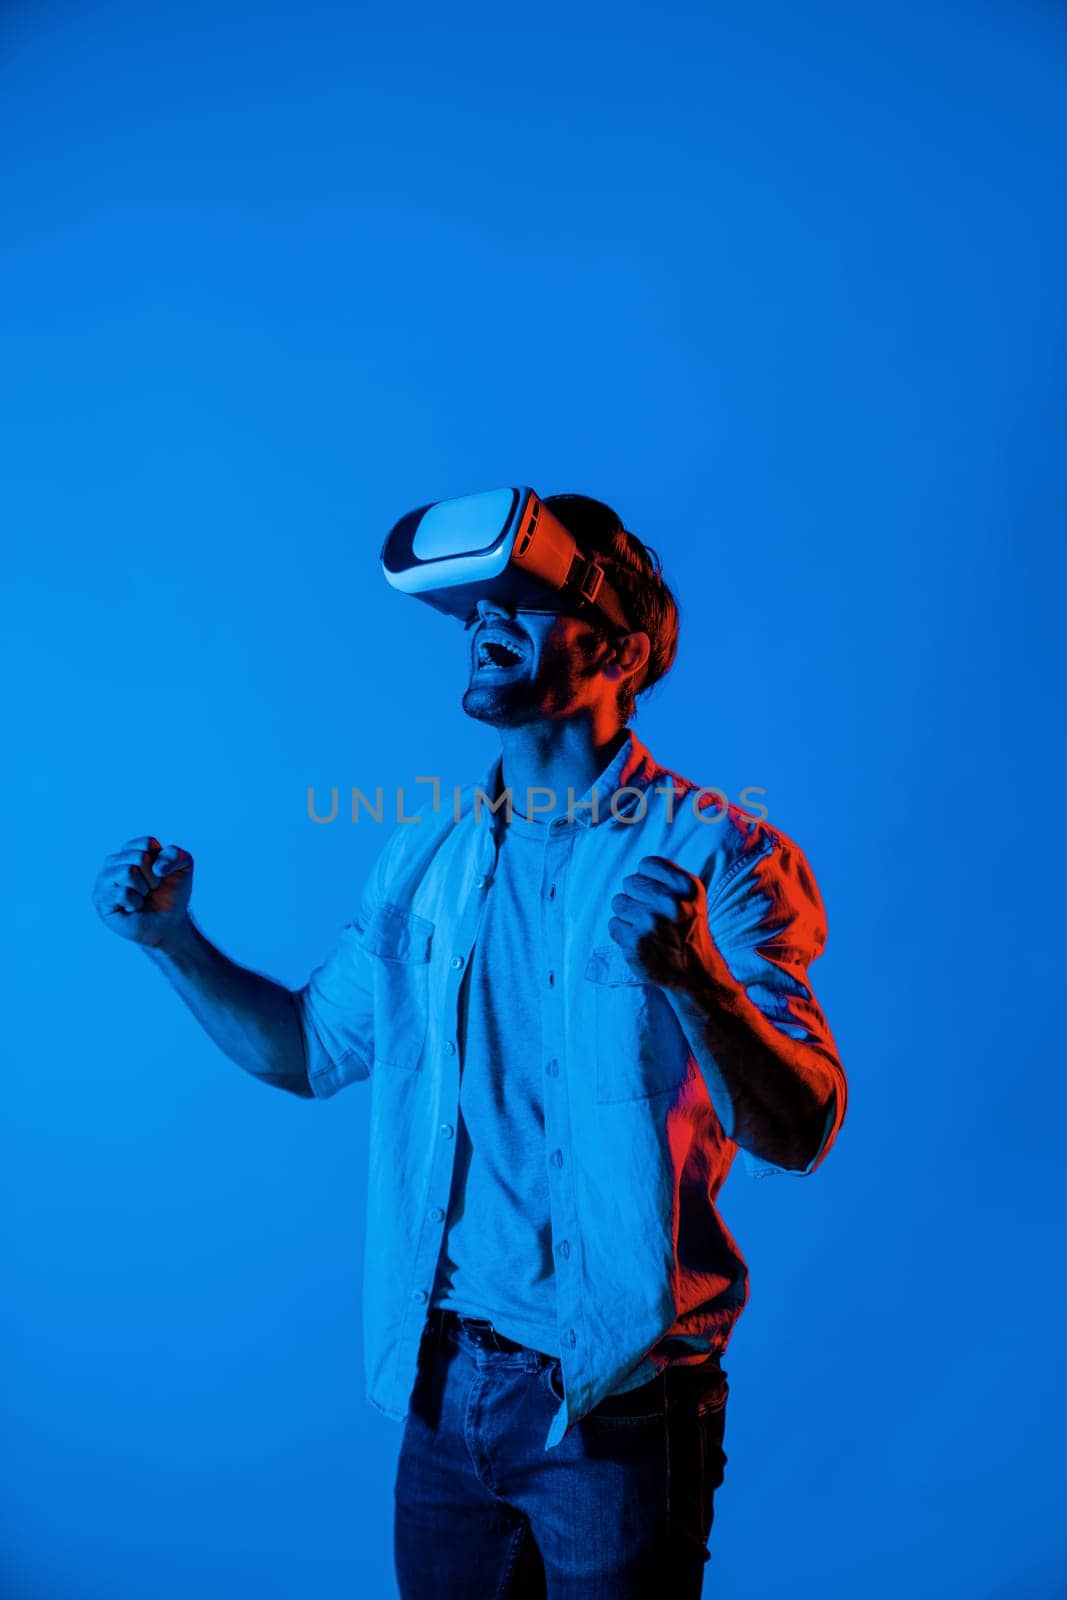 Professional gamer put the hand in the air to celebrate for winning game while wearing VR goggle at colorful neon light background. Caucasian man using technology innovation and enter. Deviation.